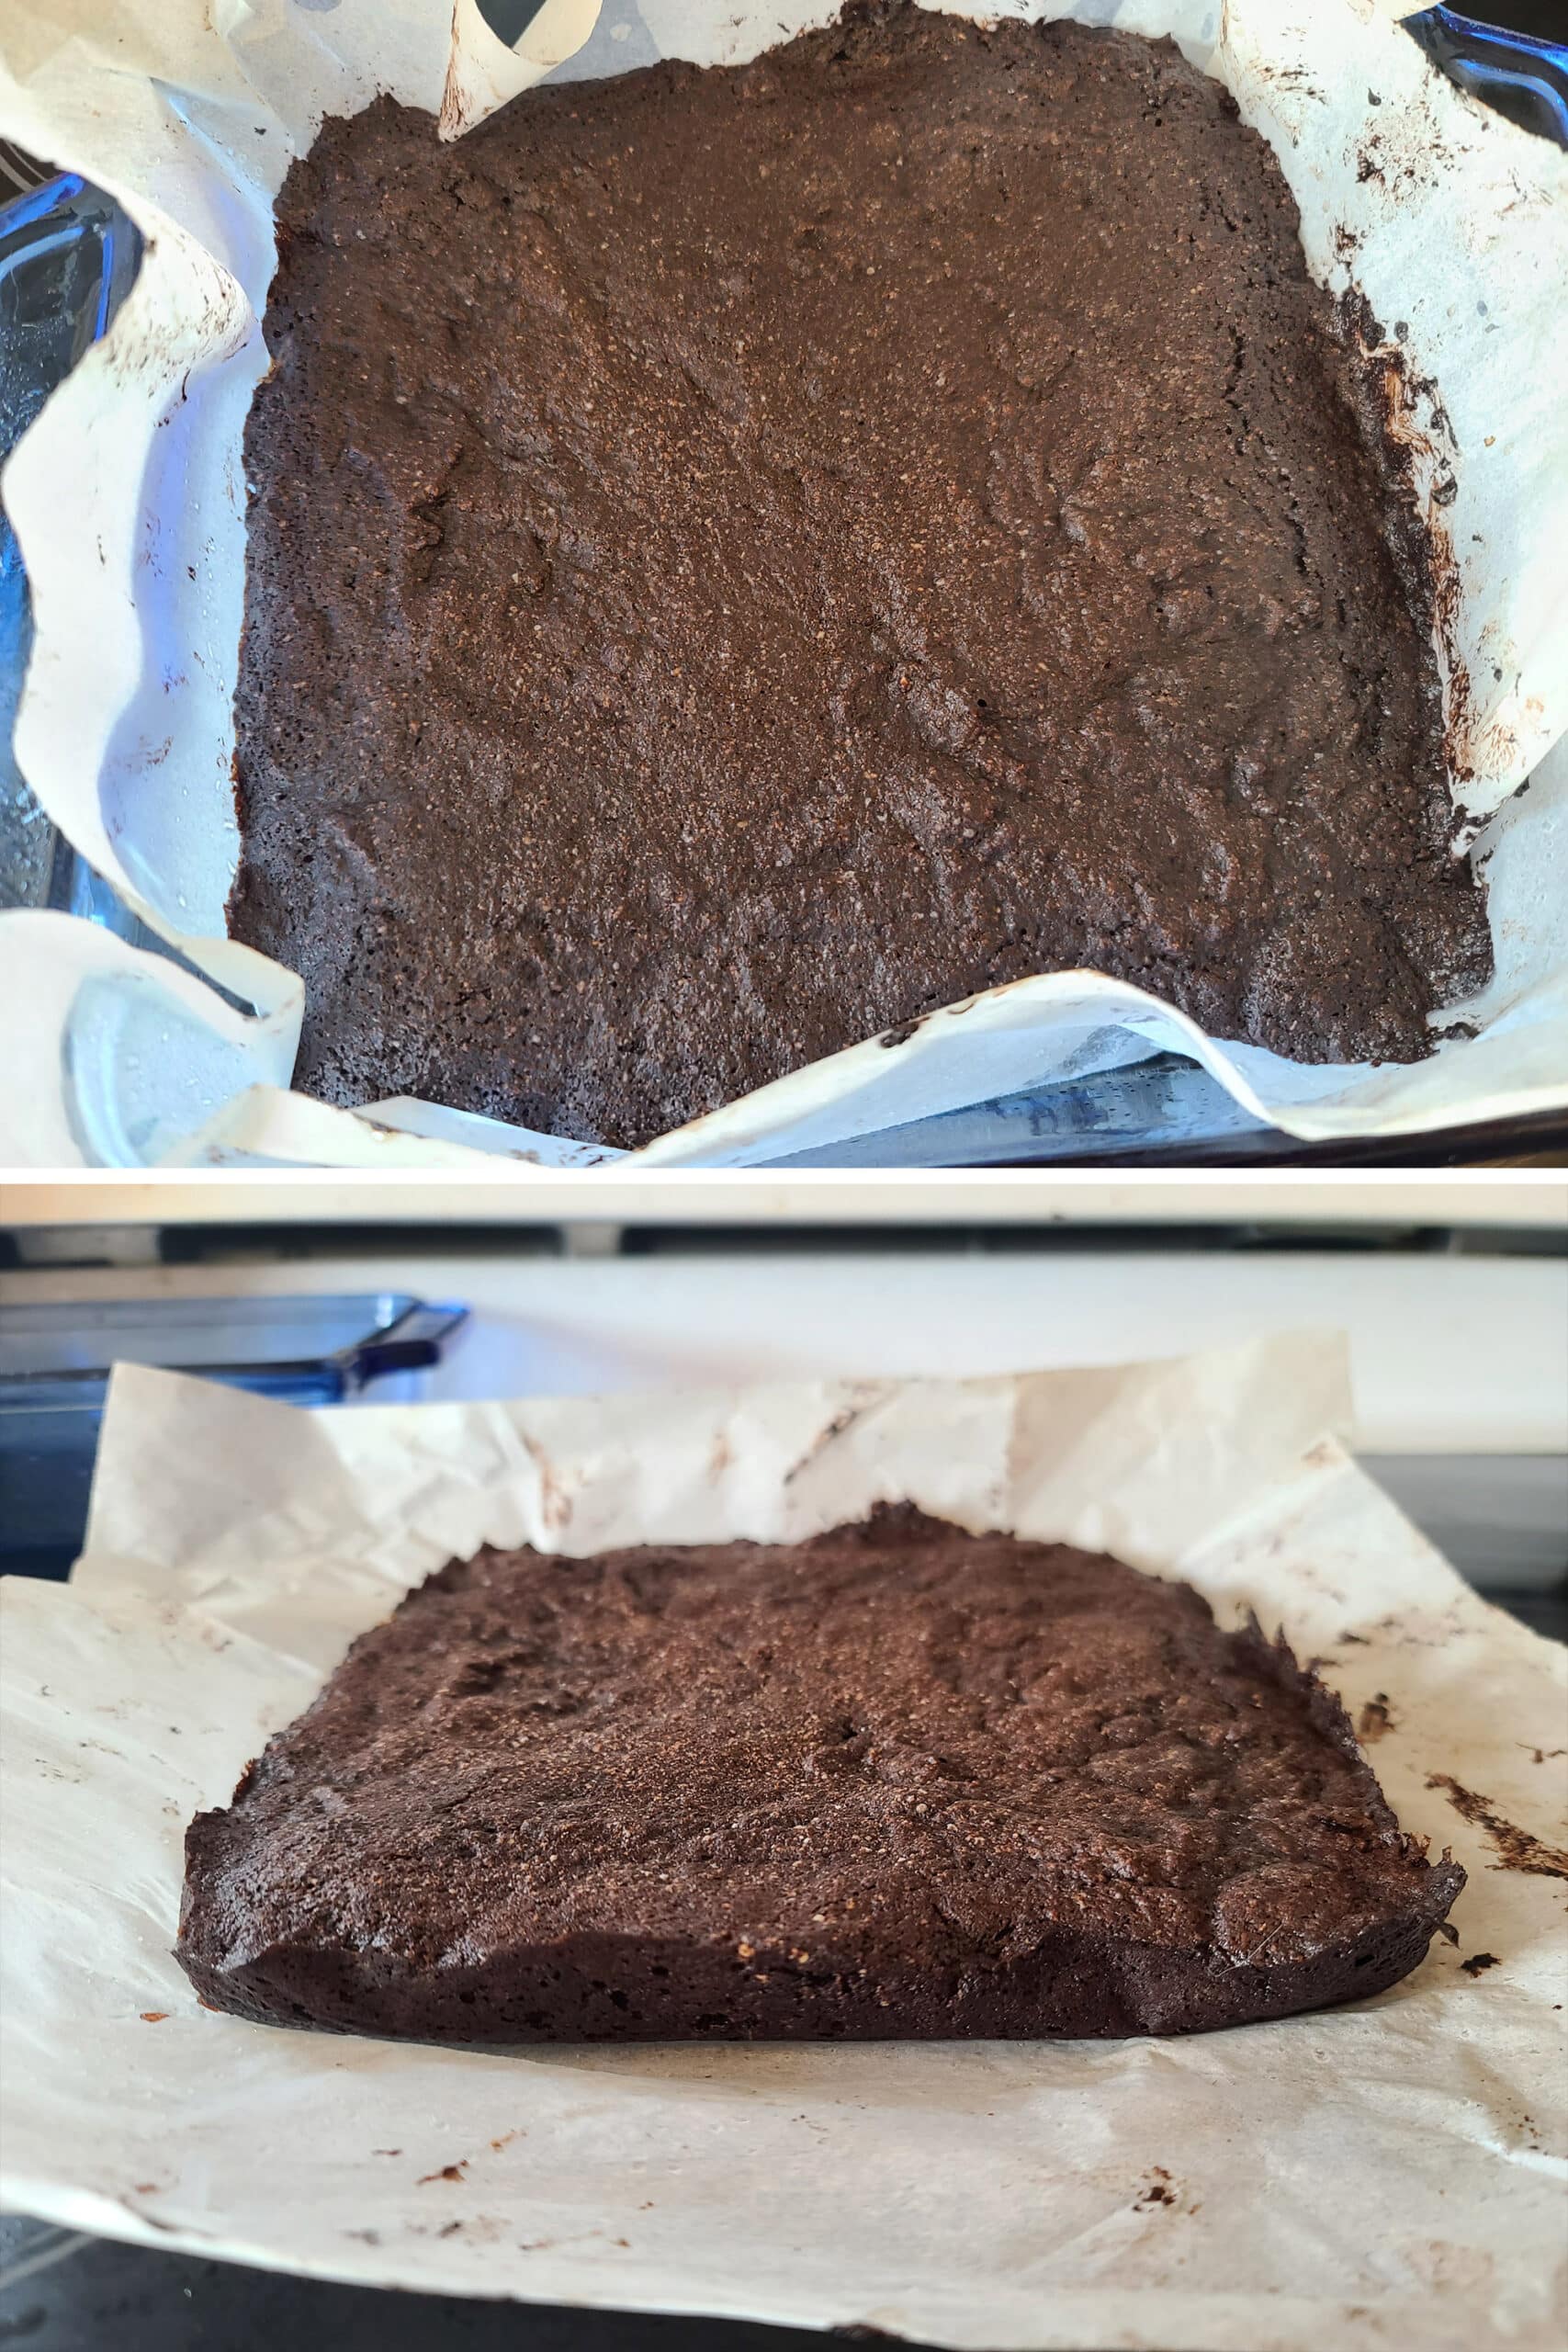 A 2 part image showing the baked pan of low carb brownies before and after being removed from the pan.